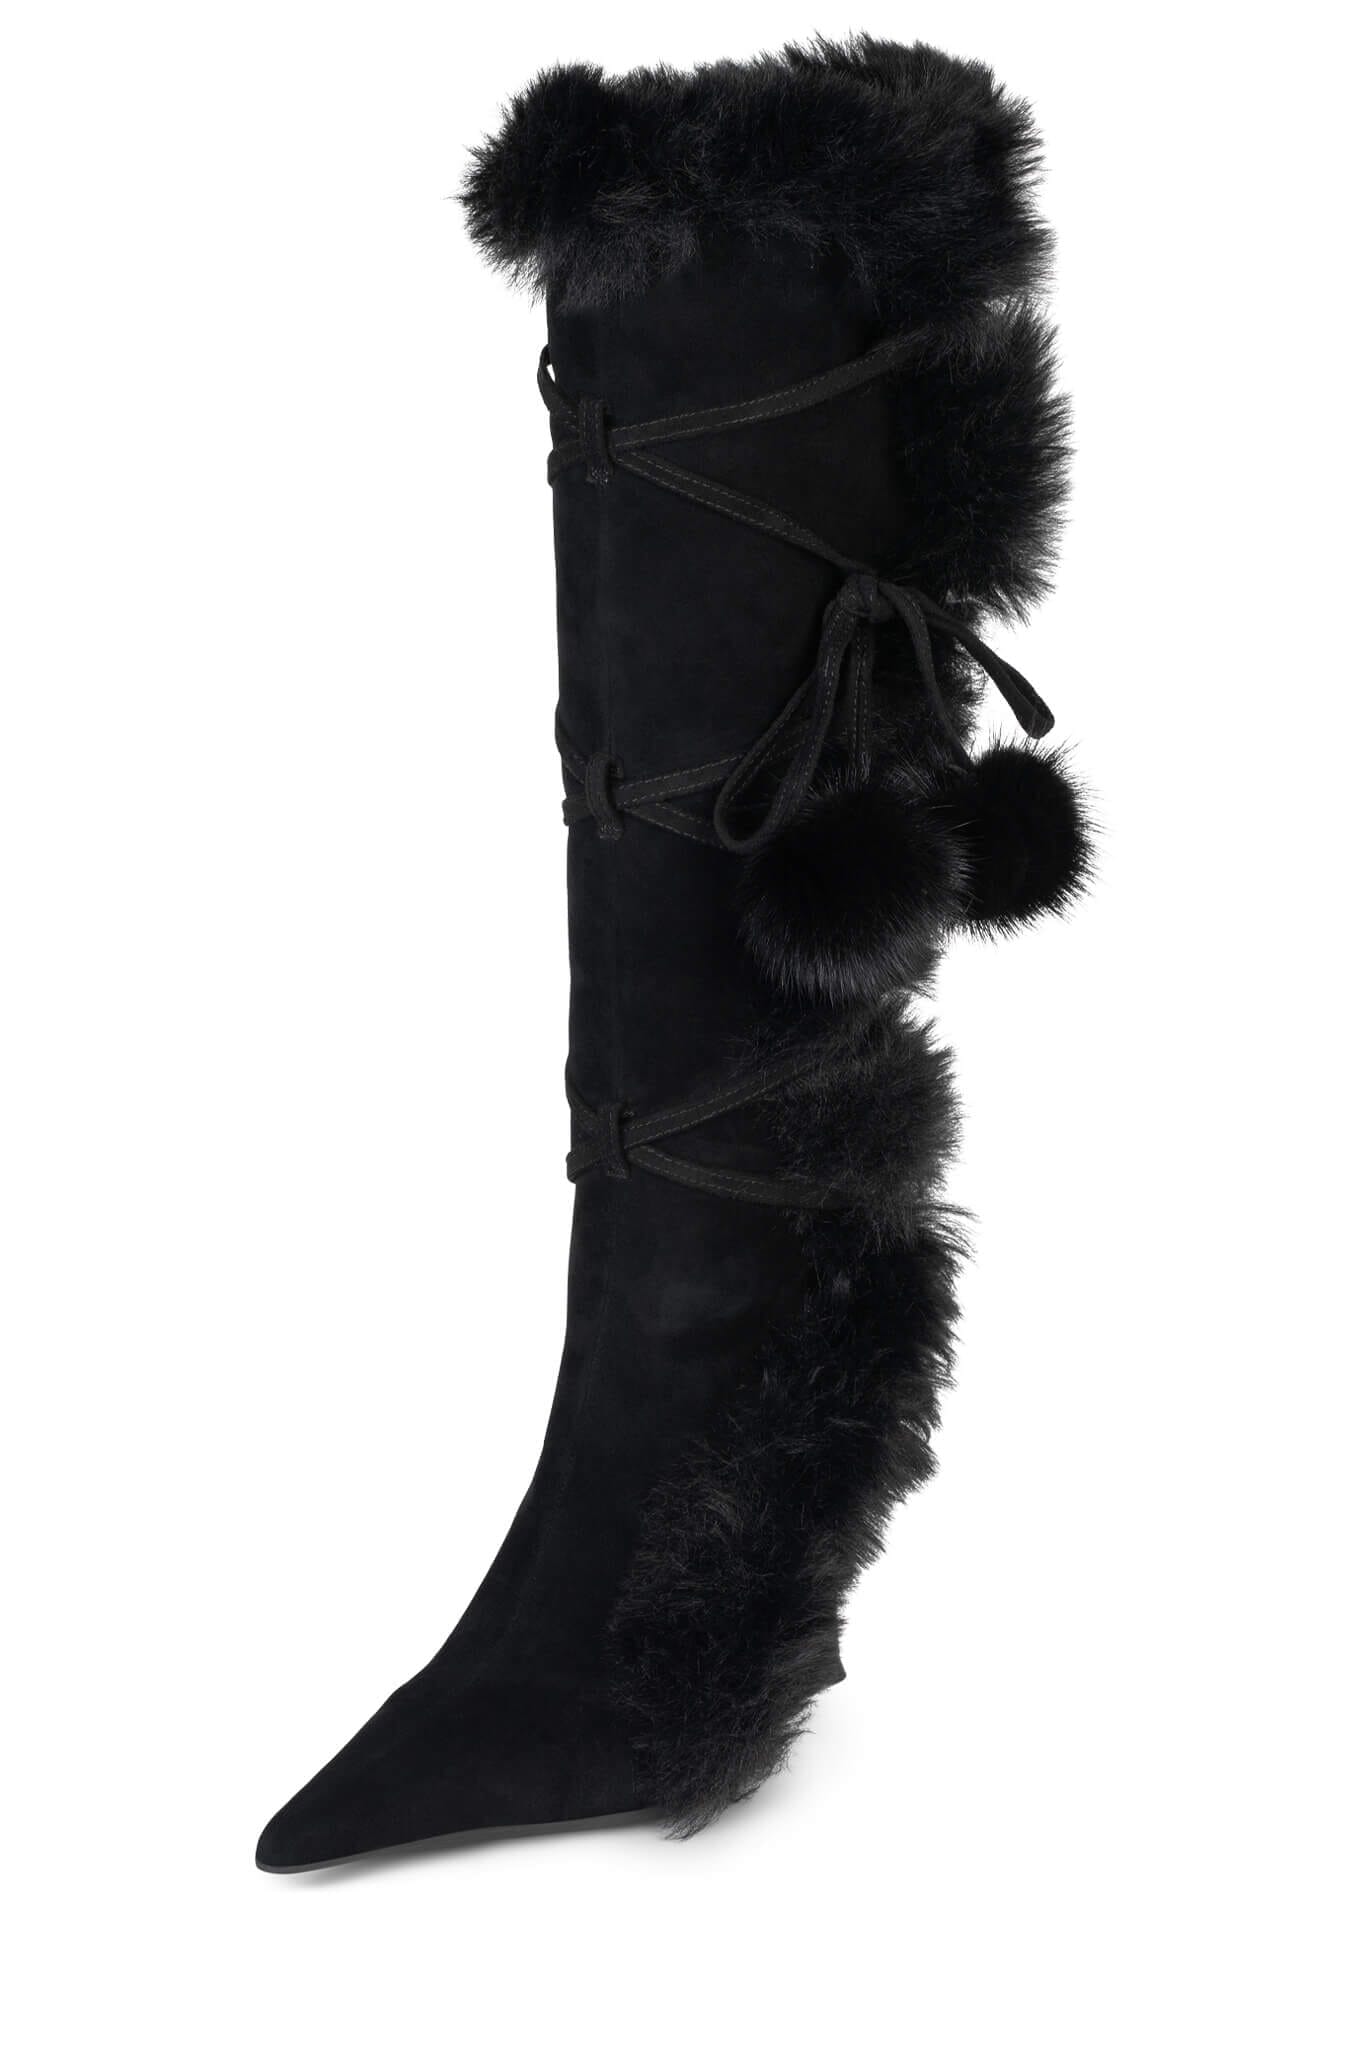 Jeffrey Campbell Fluffy yeti knee boot in black